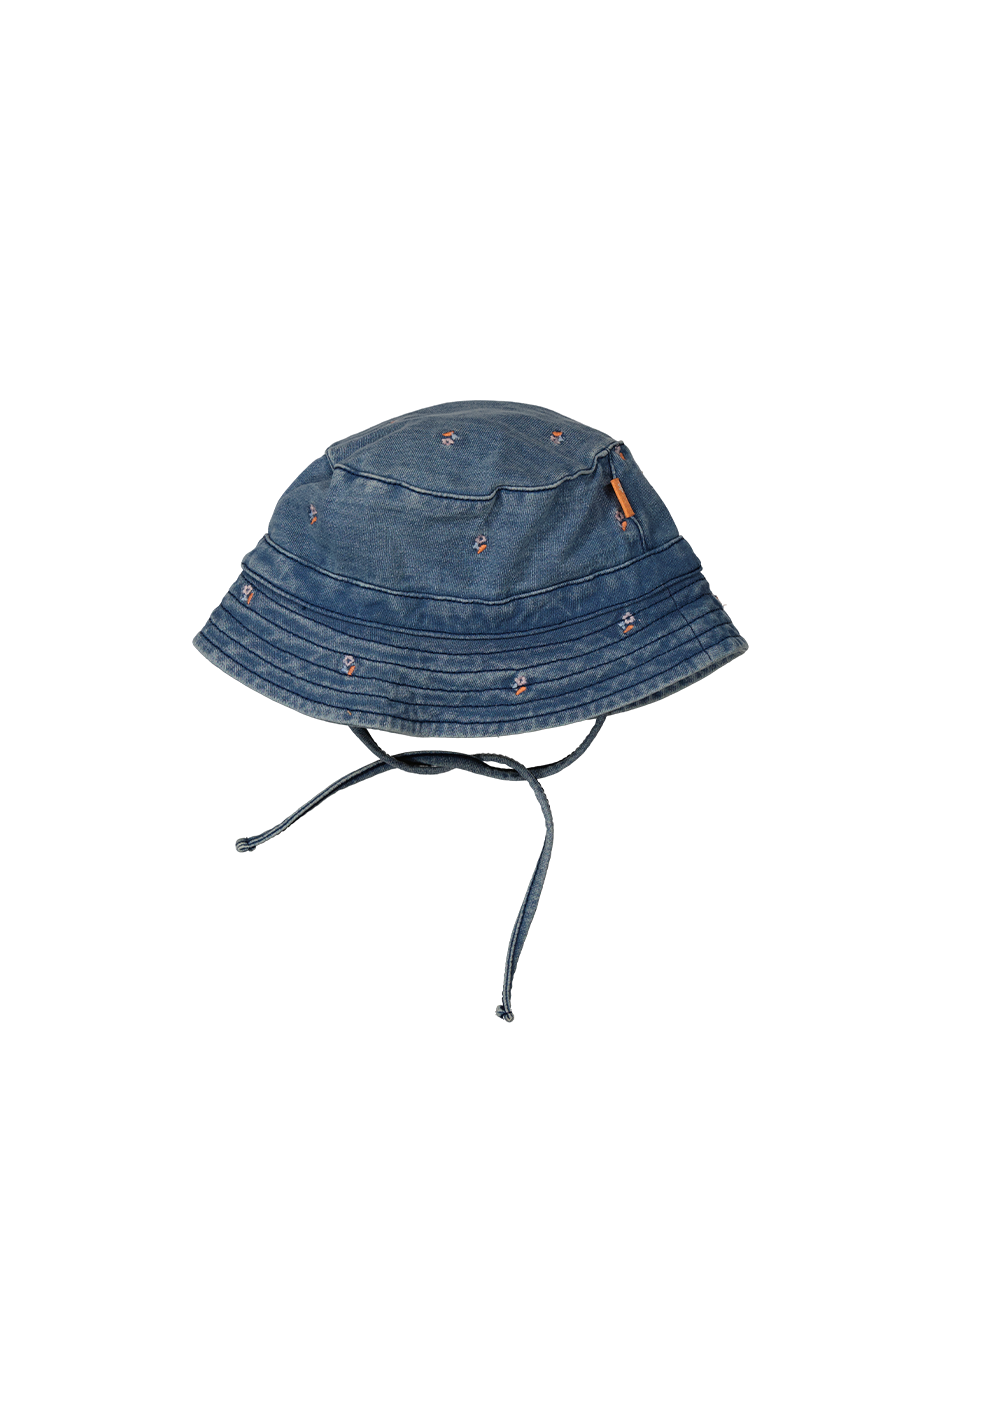 BESS S24 l2 Sunhat Embroidery Flower Stone Wash 241127-021